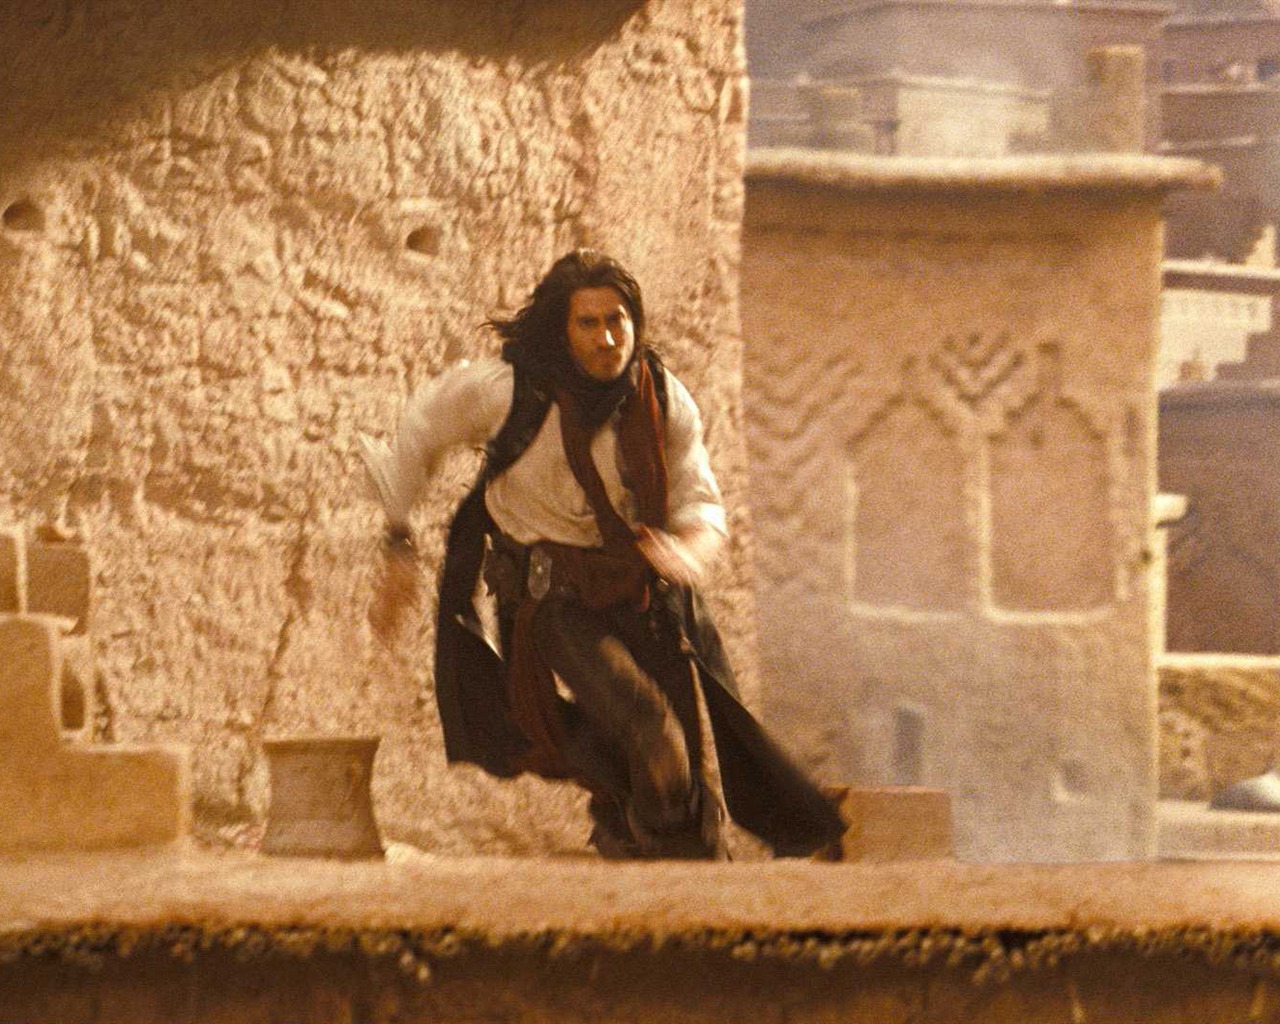 Prince of Persia The Sands of Time 波斯王子：時之刃 #34 - 1280x1024